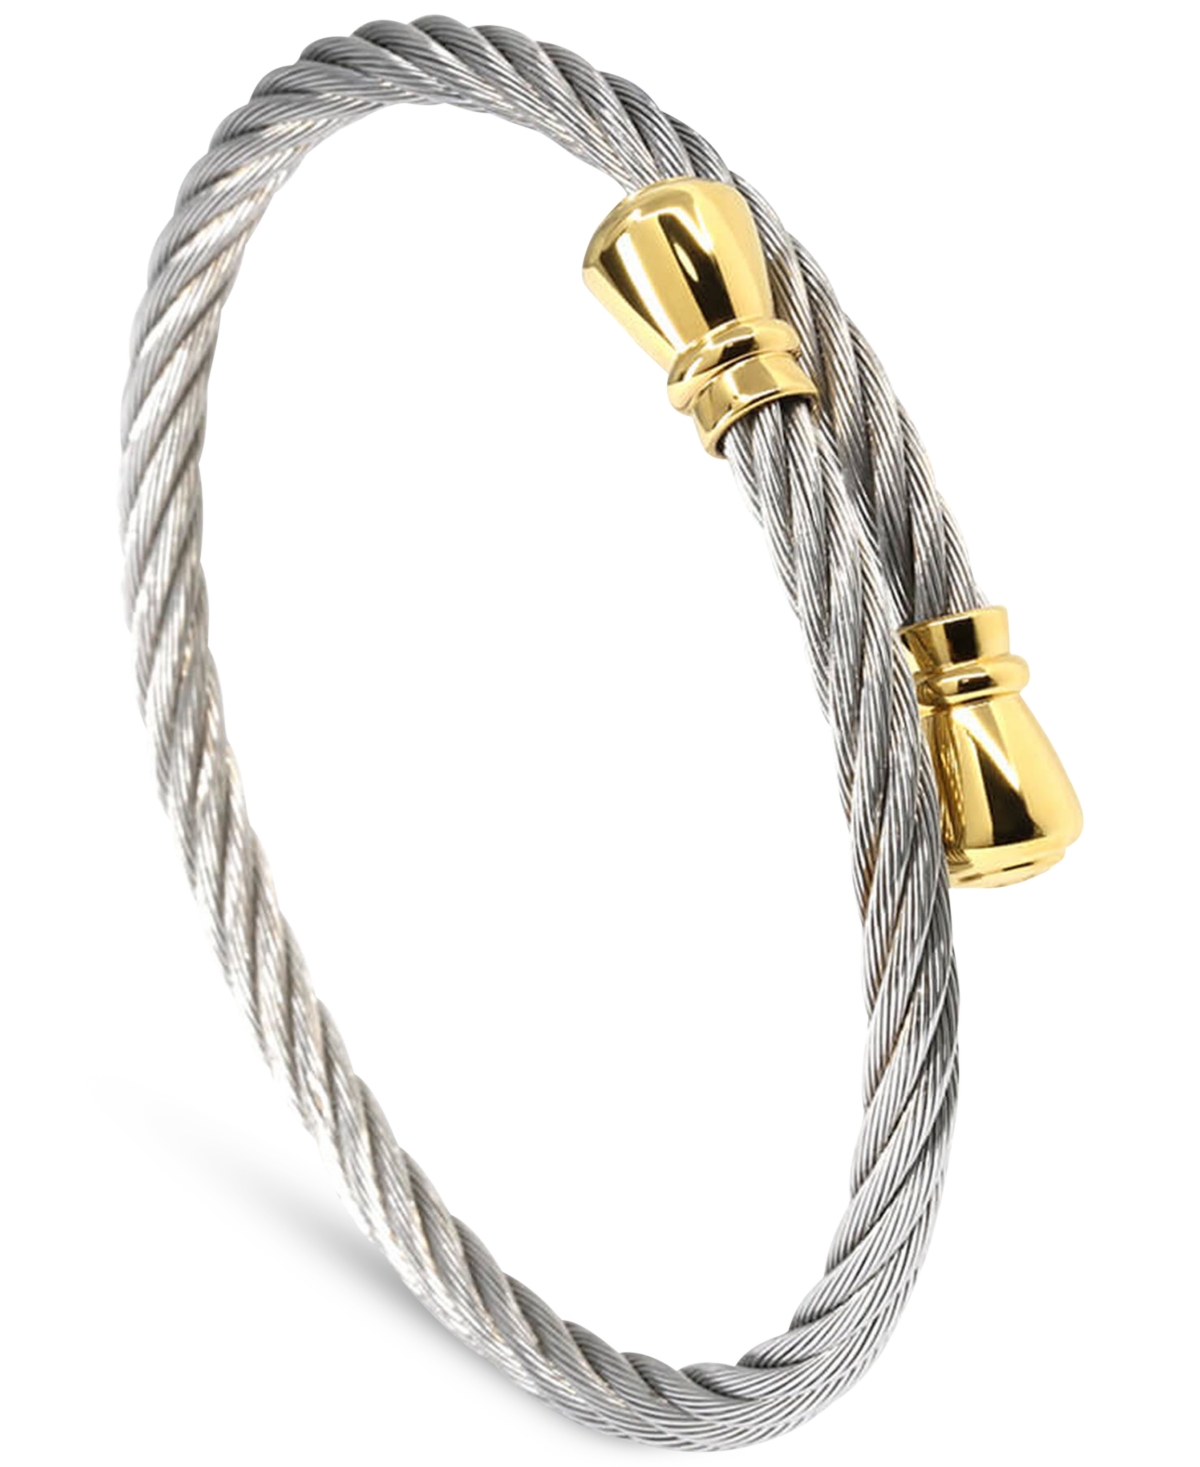 Cable & Cap Two-Tone Bypass Bangle Bracelet in Stainless Steel & Yellow Gold Pvd - Two Tone